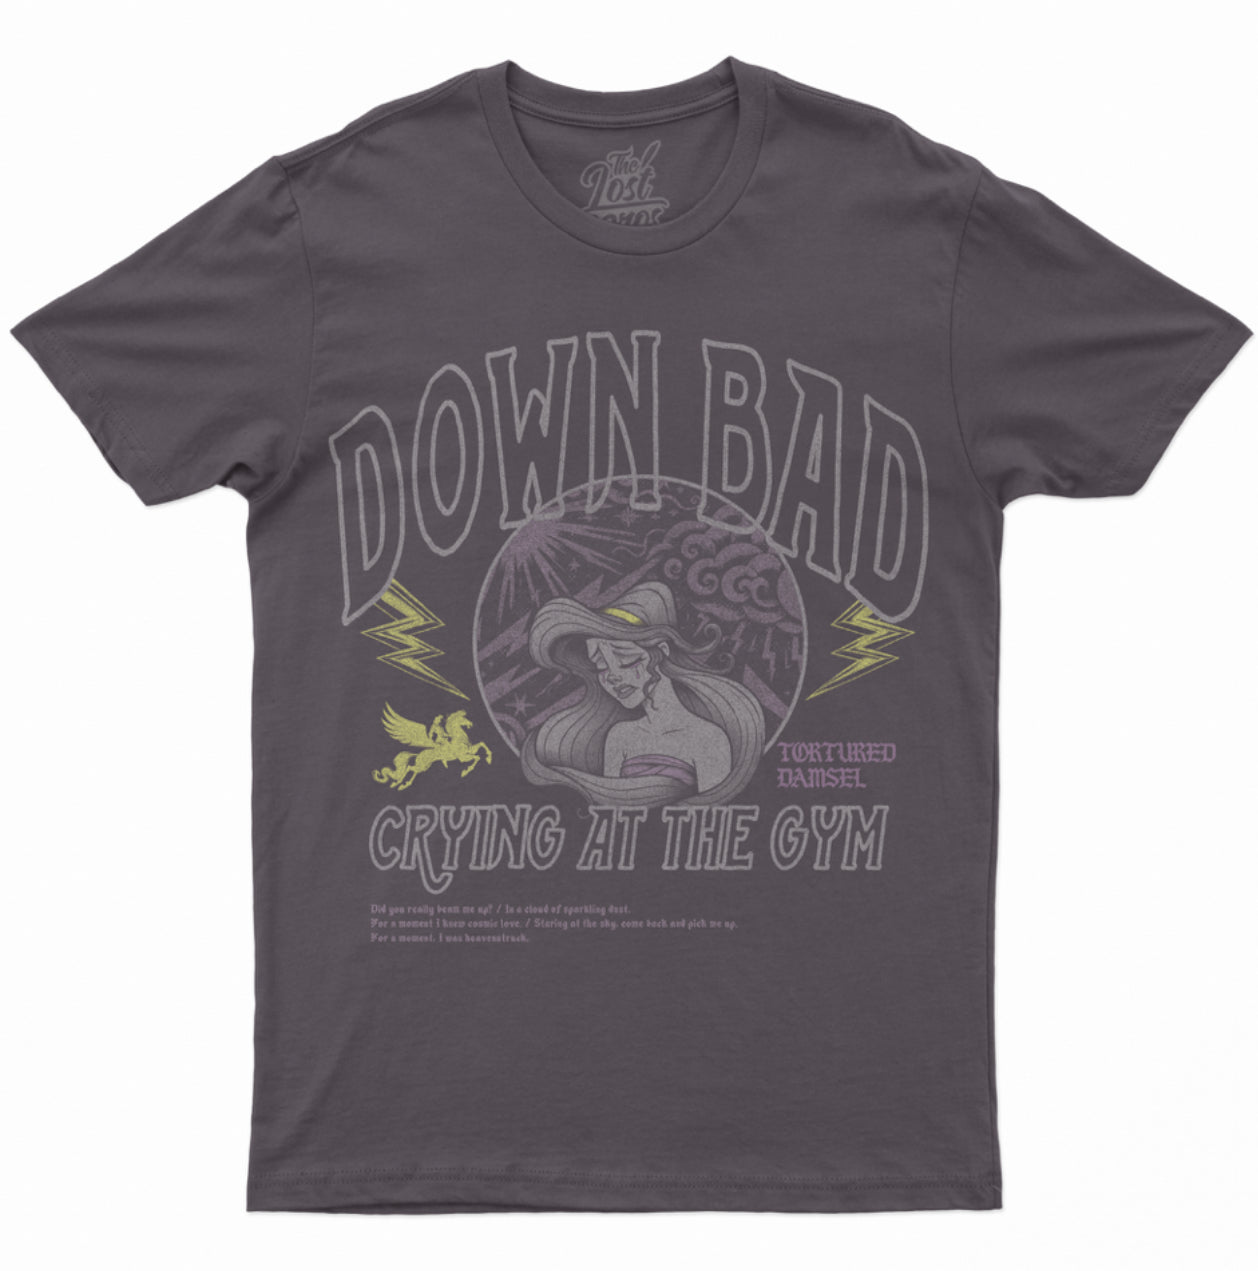 Down bad tee the lost bros